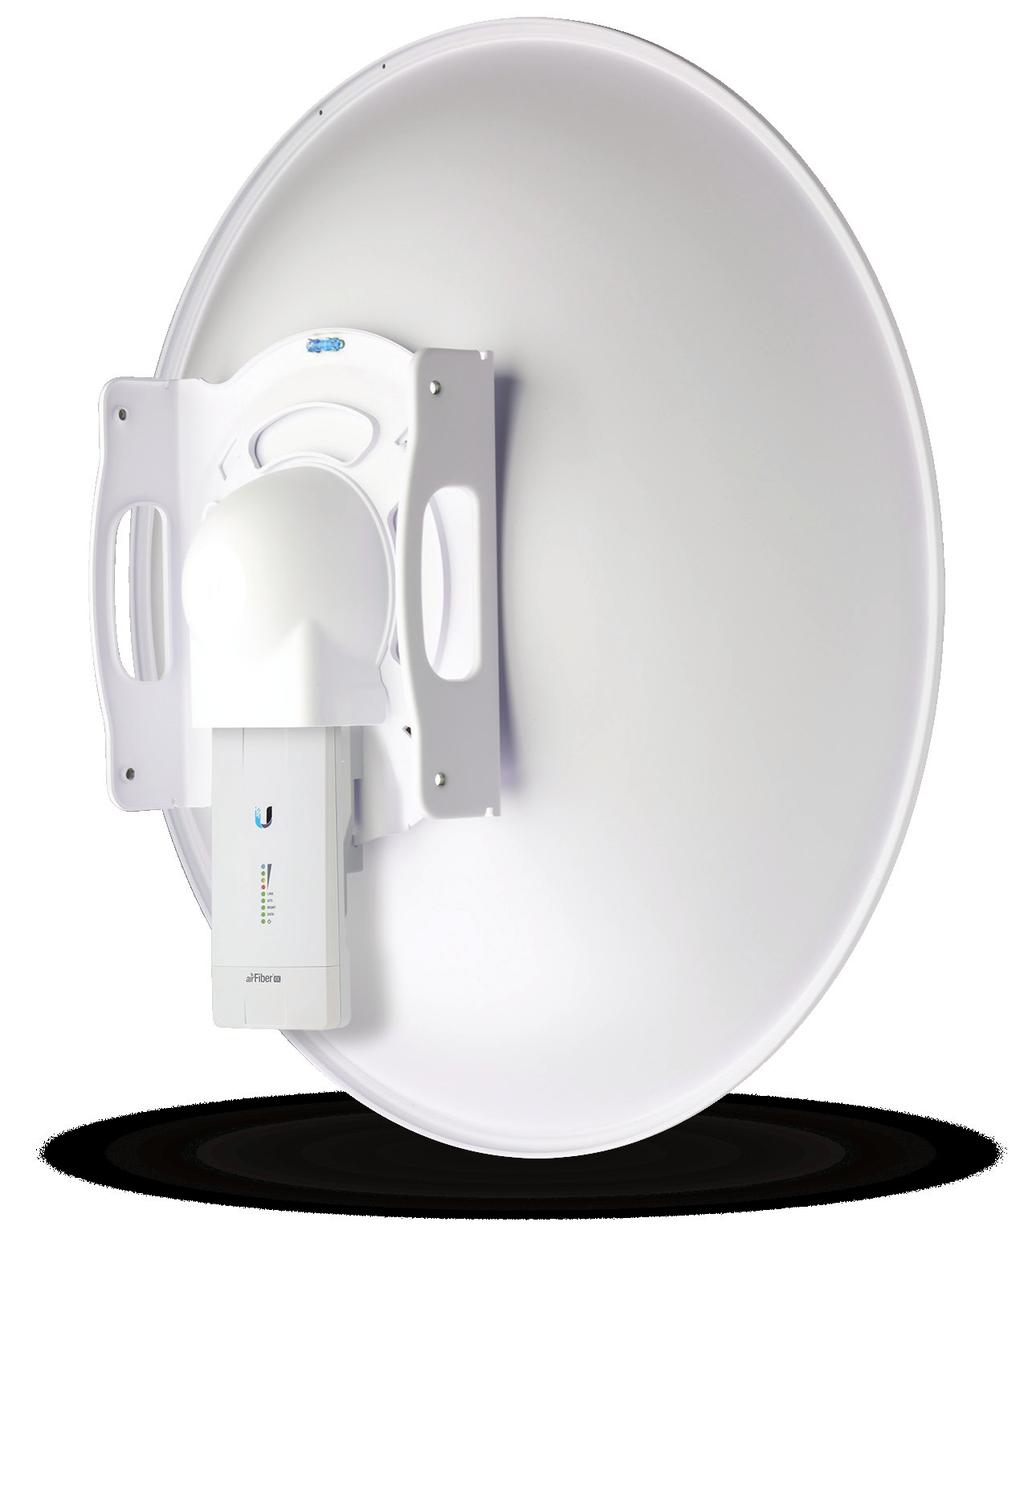 Engineered for Performance Ubiquiti s INVICTUS custom silicon and proprietary radio architecture are designed specifically for long-distance, outdoor wireless applications.